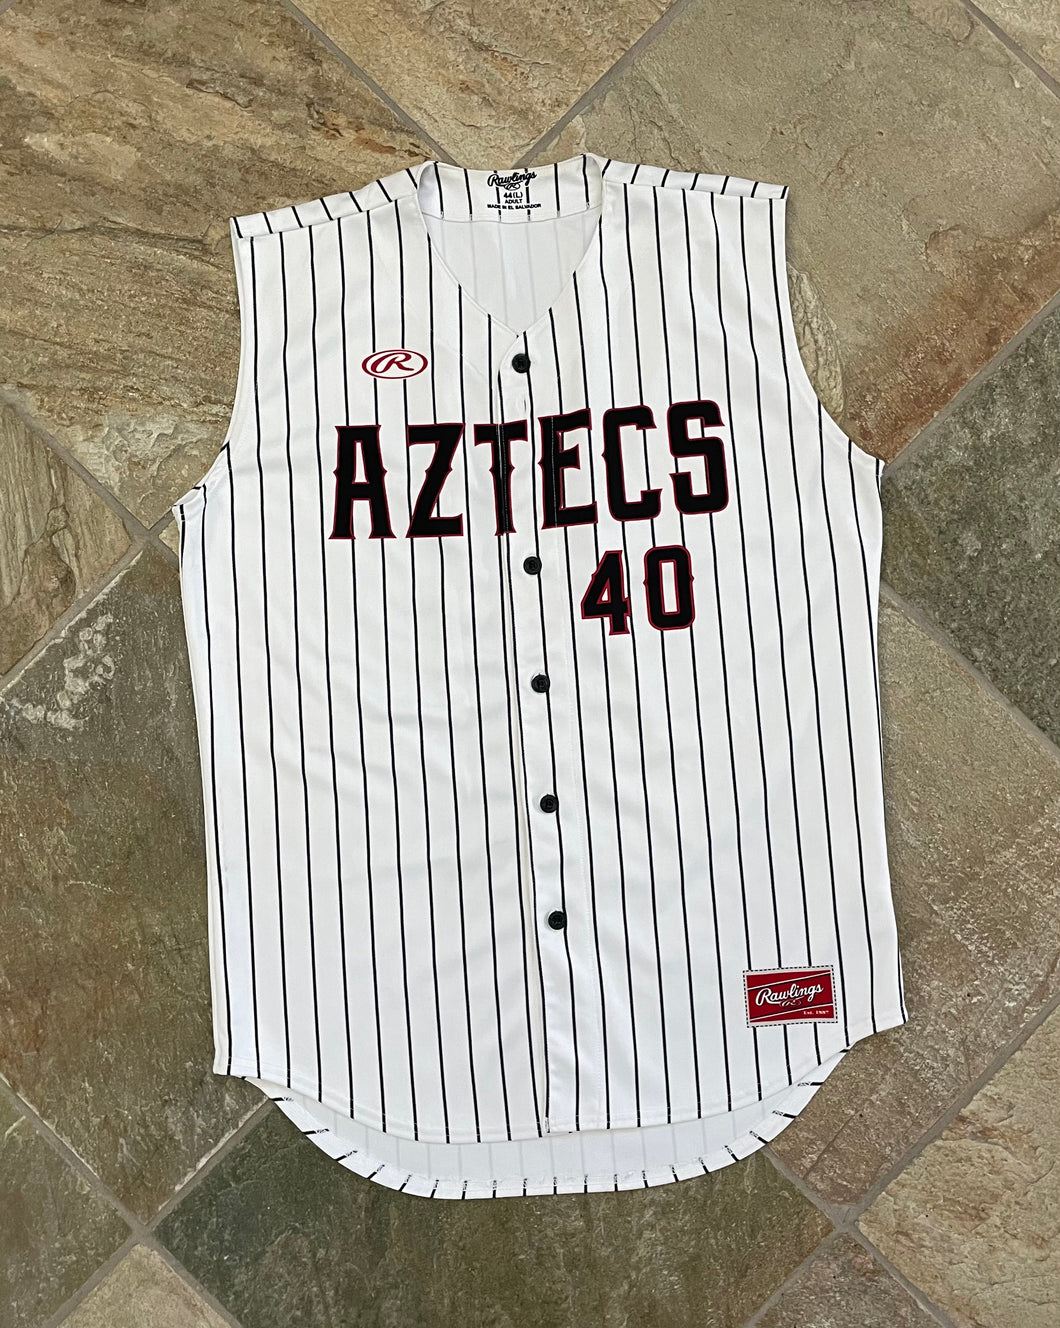 San Diego State Aztecs Team Issued Rawlings Baseball College Jersey, Size 44, Large